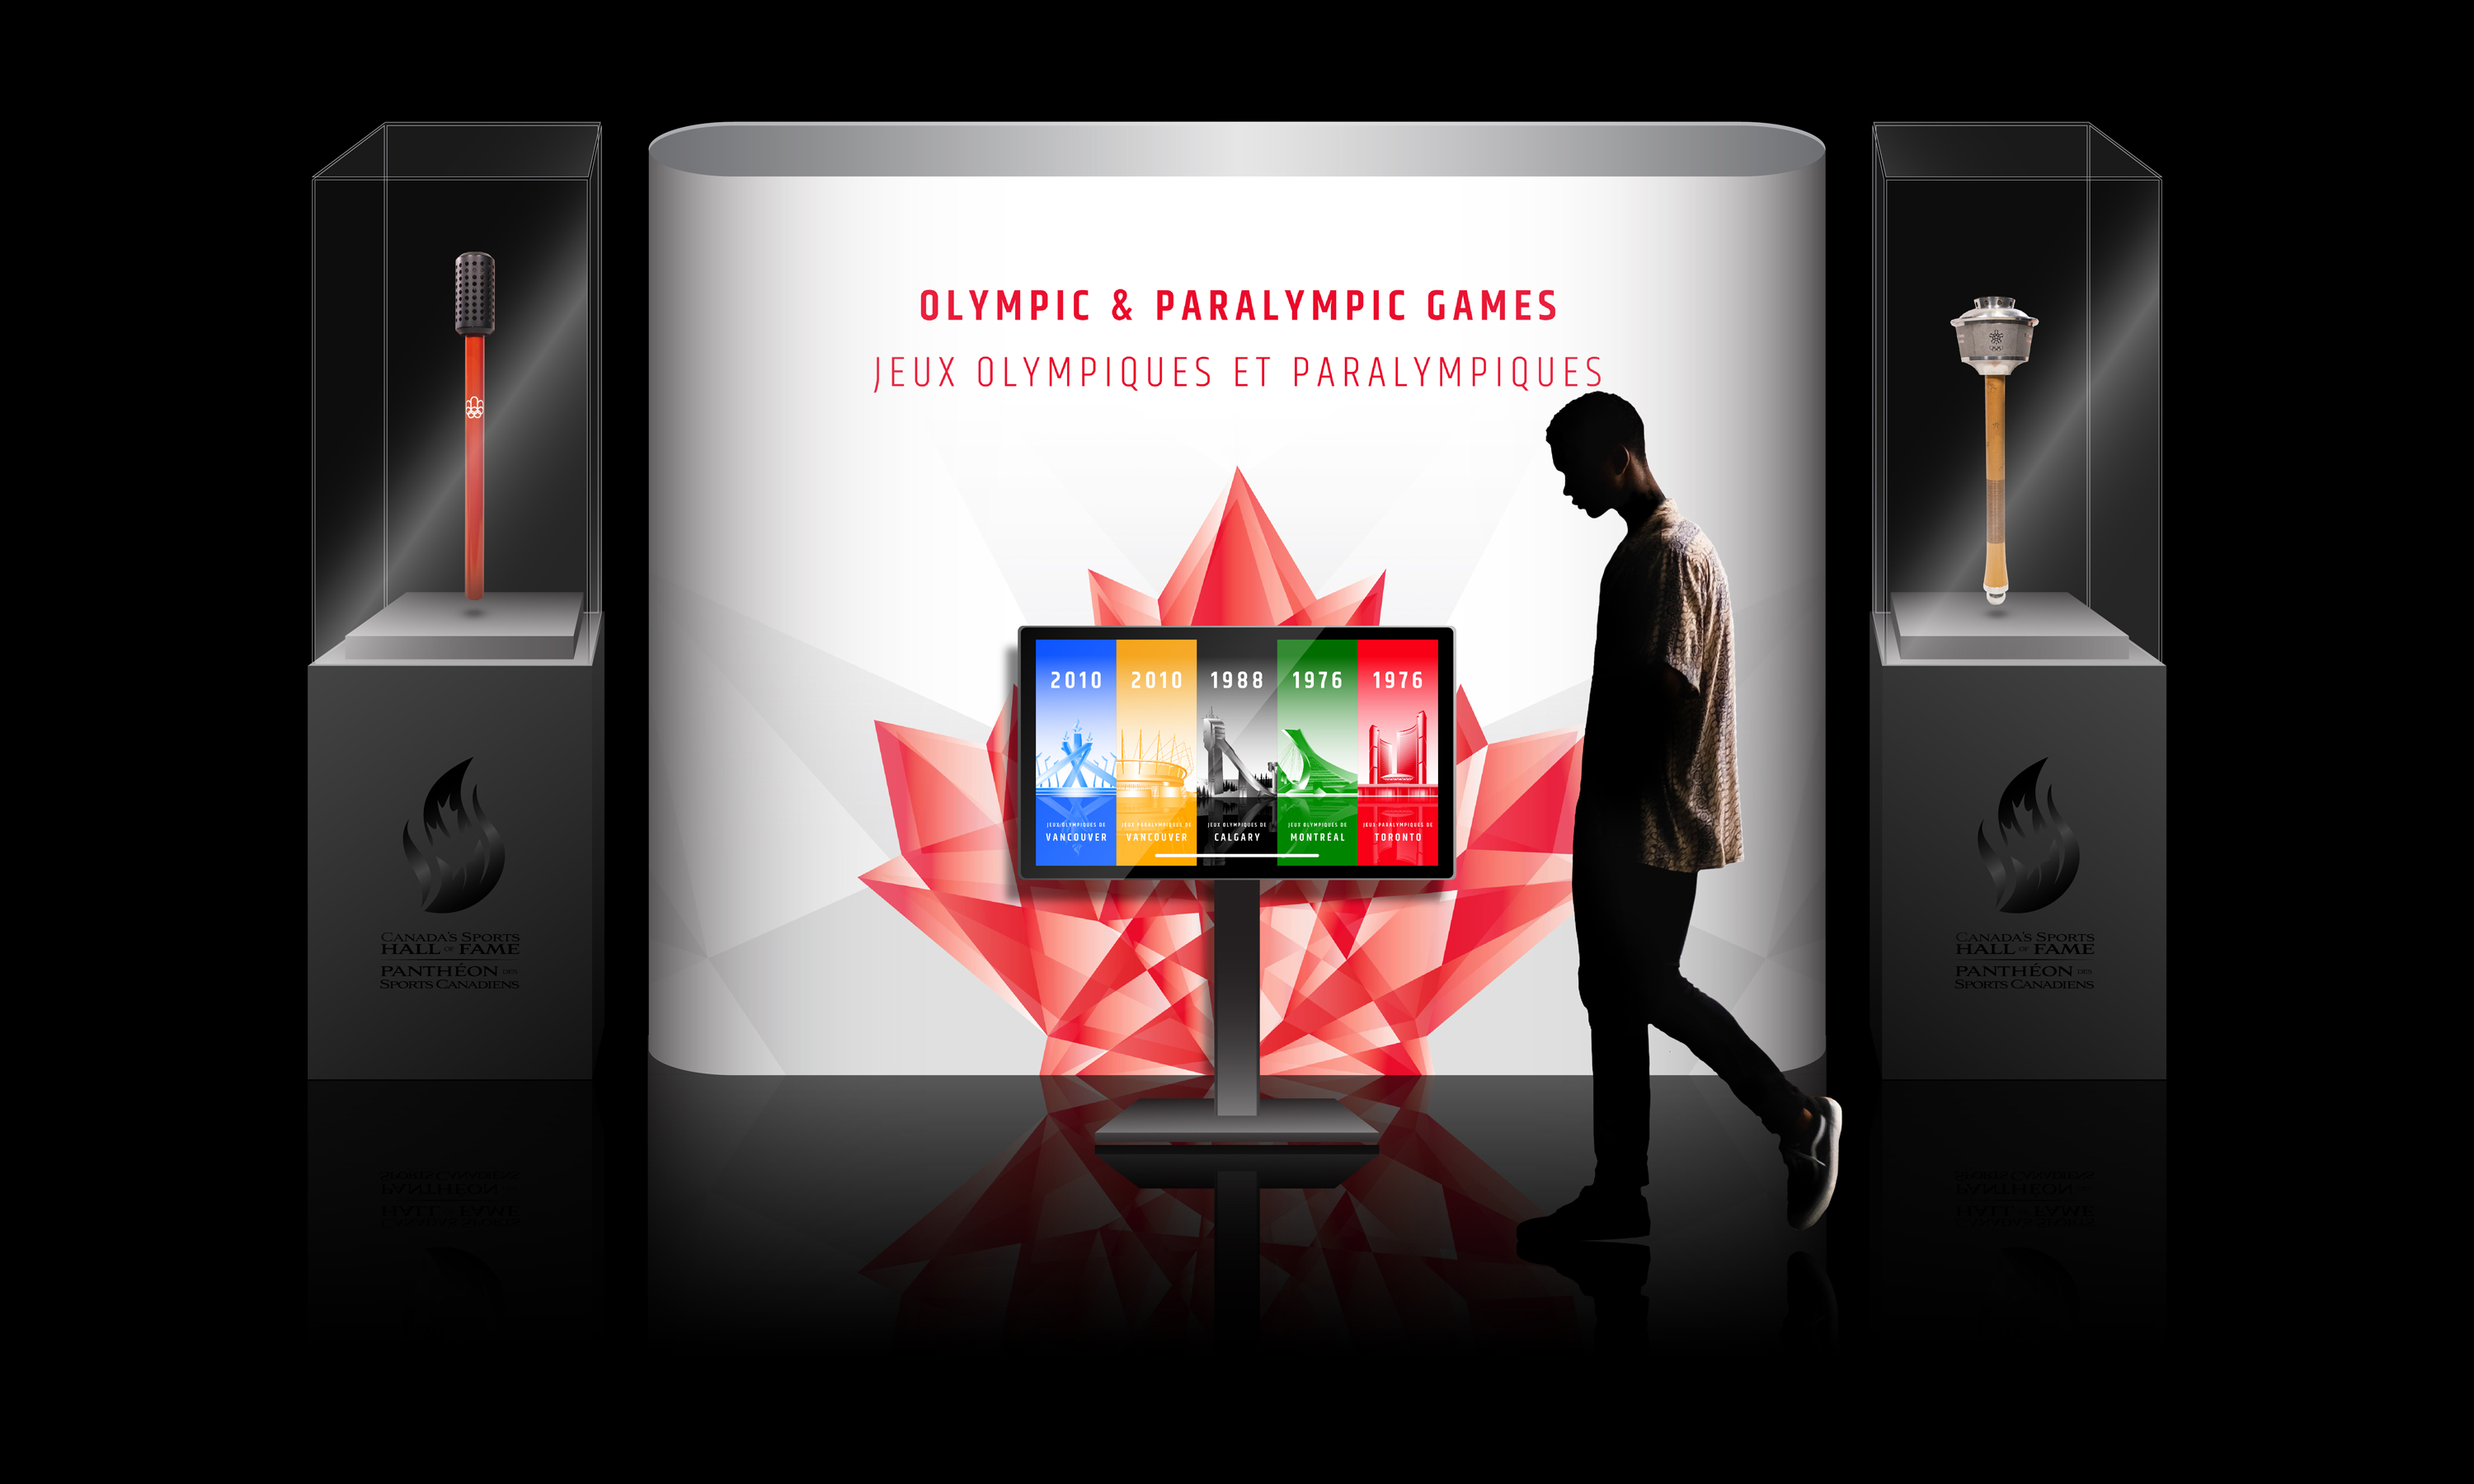 The Olympic & Paralympic Games Gallery